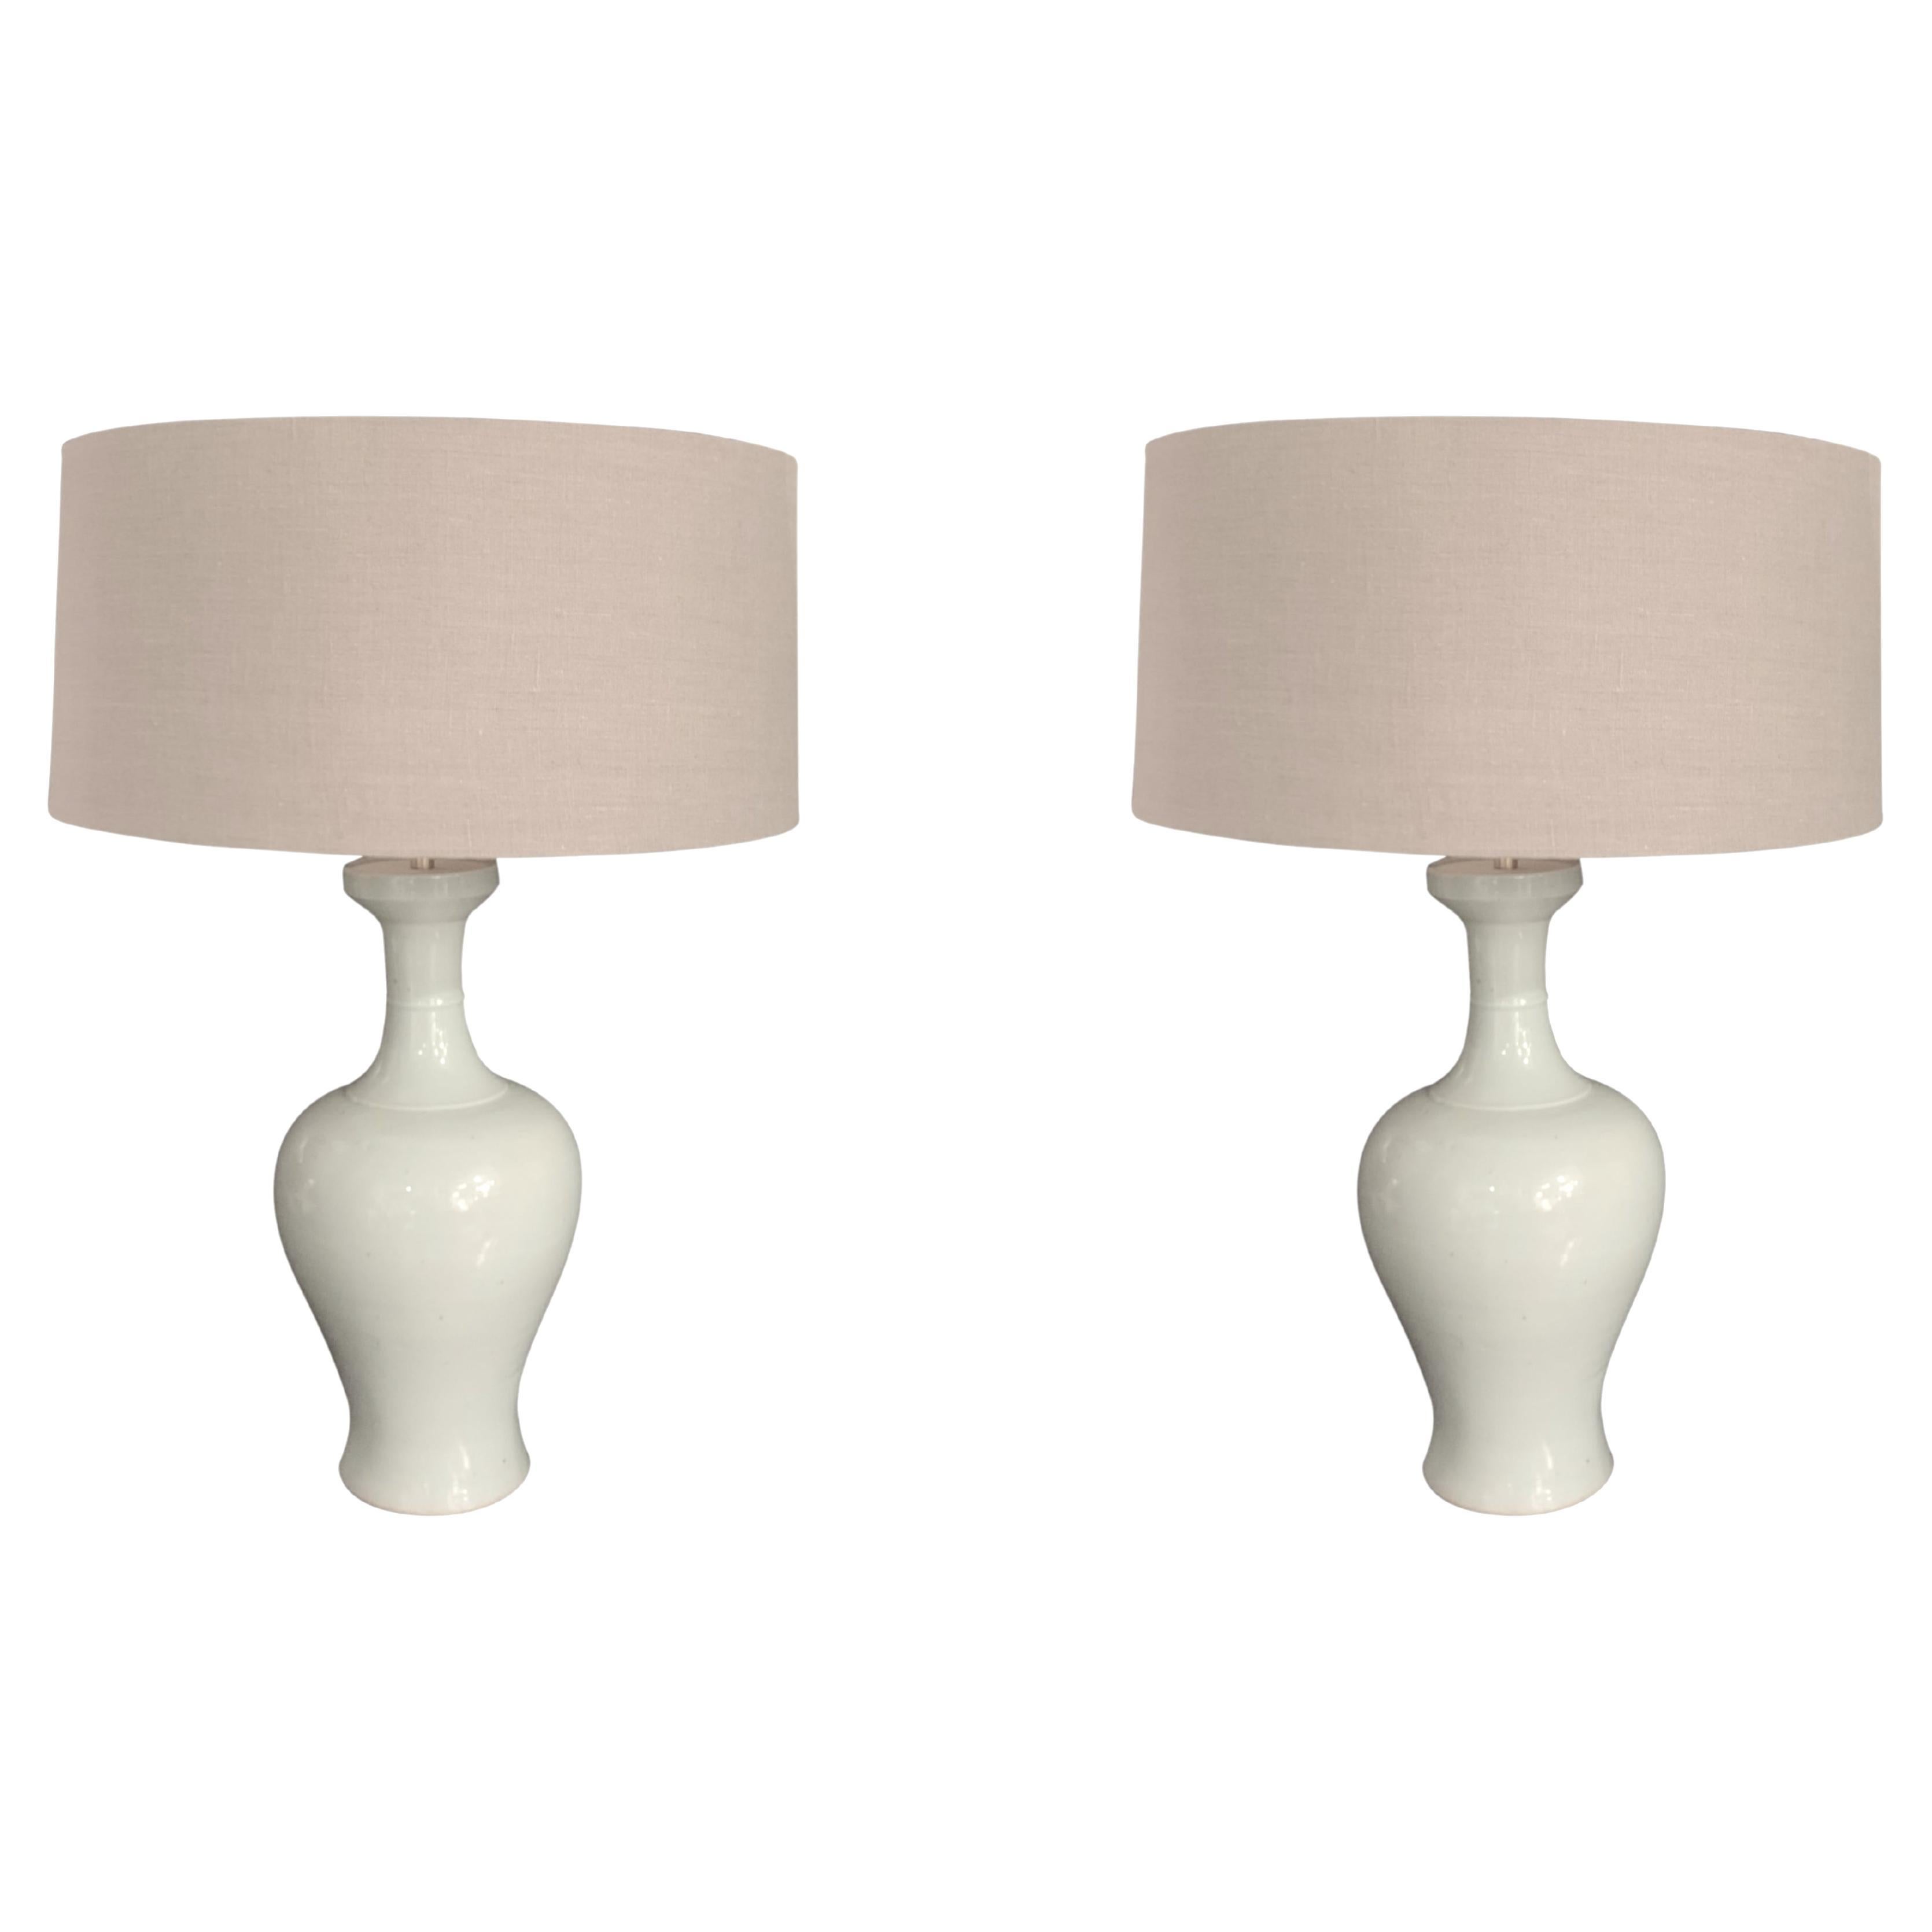 Very Pale Blue Pair of Large Lamps, China, Contemporary